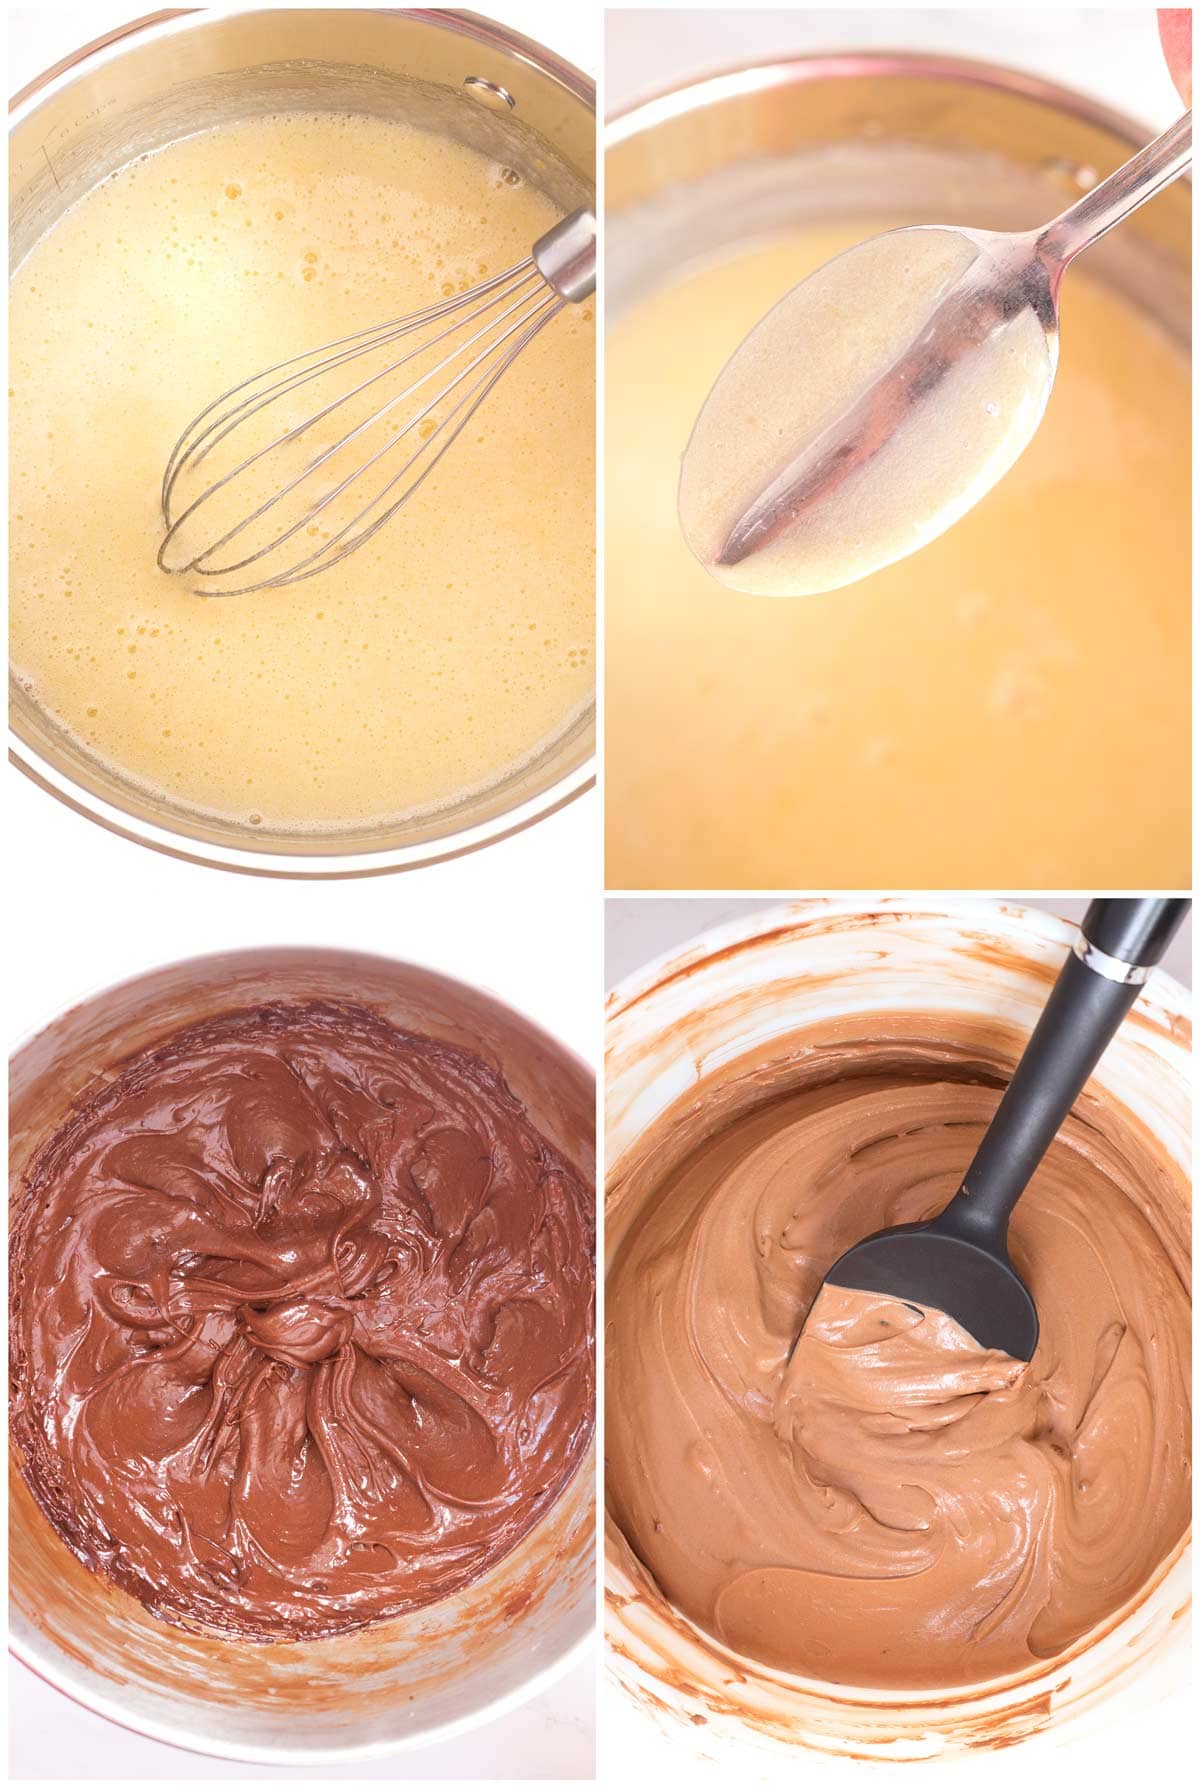 Step-by-step photos for making french silk inspired chocolate mousse.